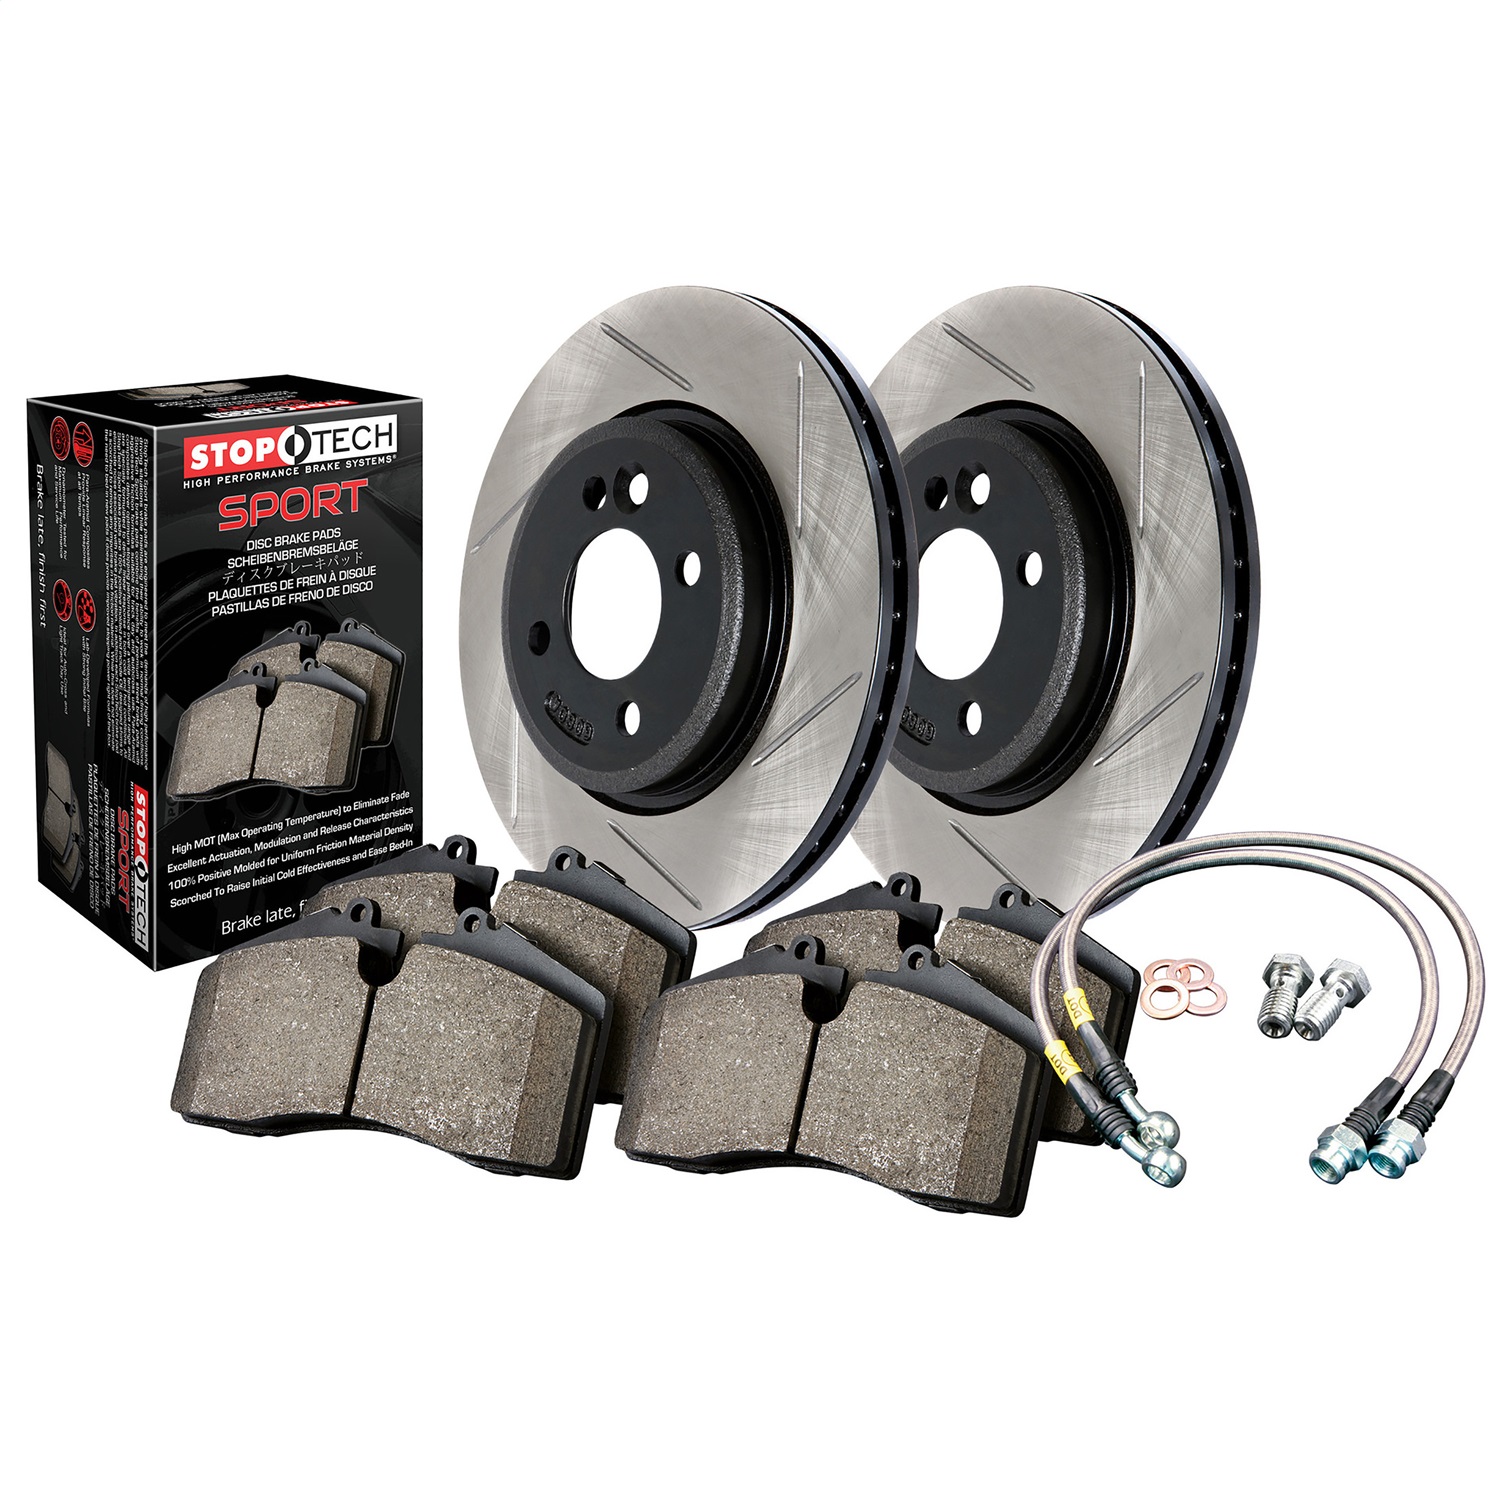 StopTech 977.34009F Sport Disc Brake Kit w/Slotted Rotors